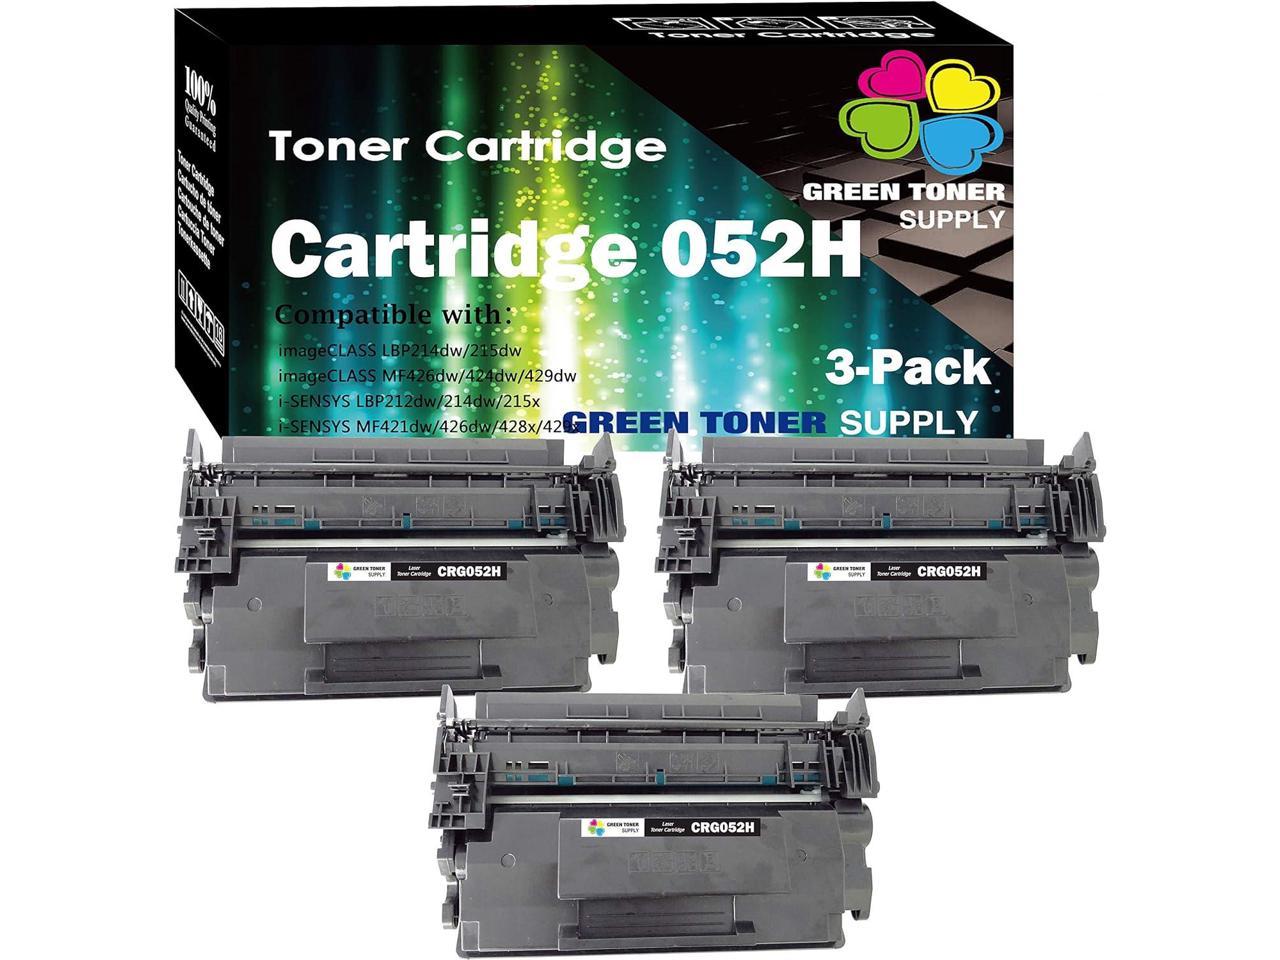 1-Pack for use with ImageCLASS LBP214dw,LBP215dw,MF424dw,MF429dw,MF426dw Series Printers INK E-SALE Compatible Toner Cartridge Replacement for Canon 052 052H 